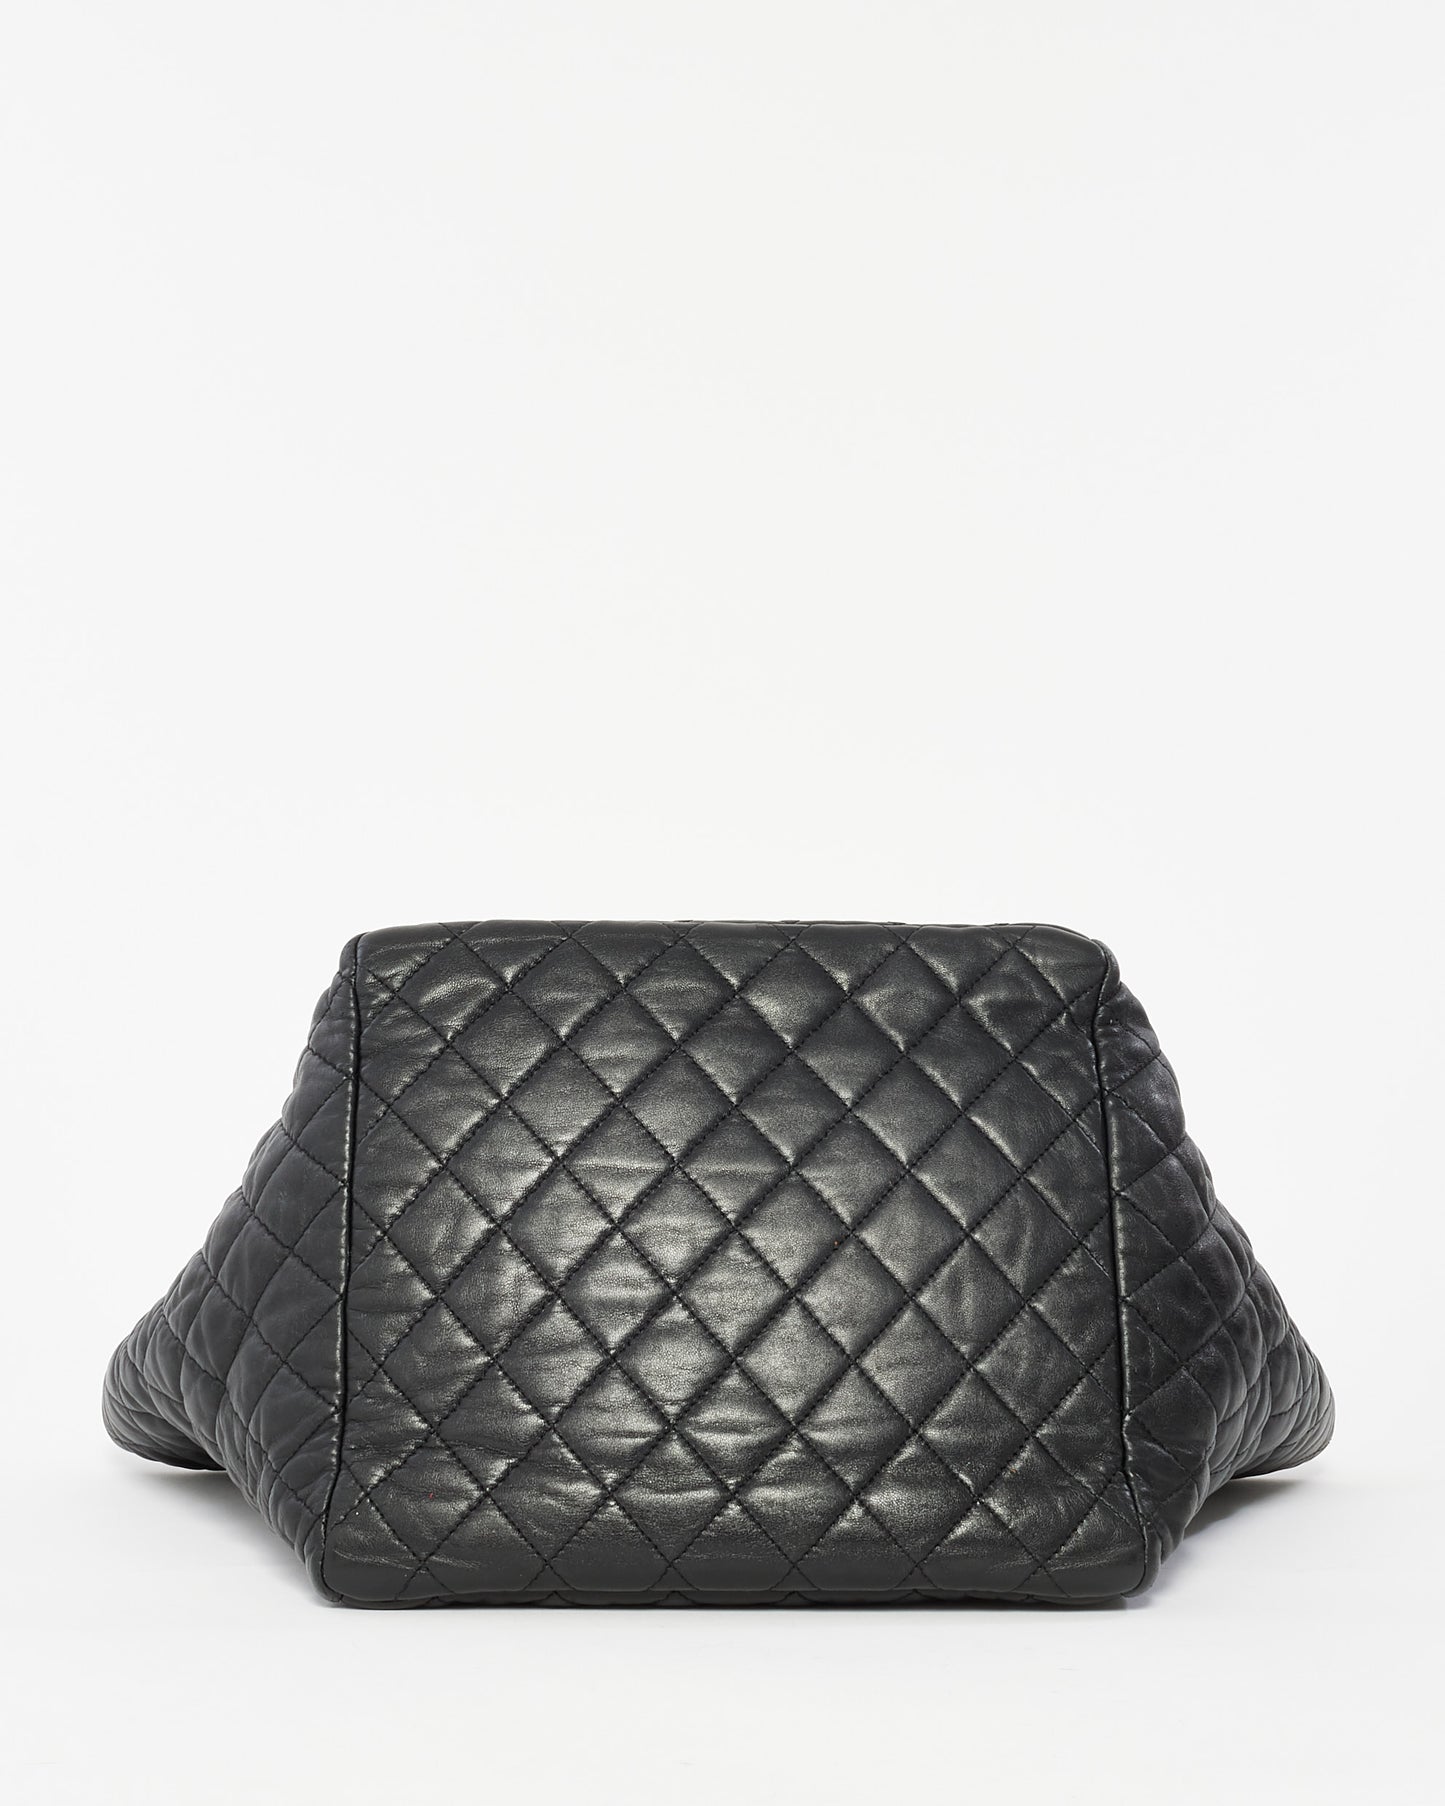 Chanel Black Calfskin Leather Ultimate Stitch Shopping Tote